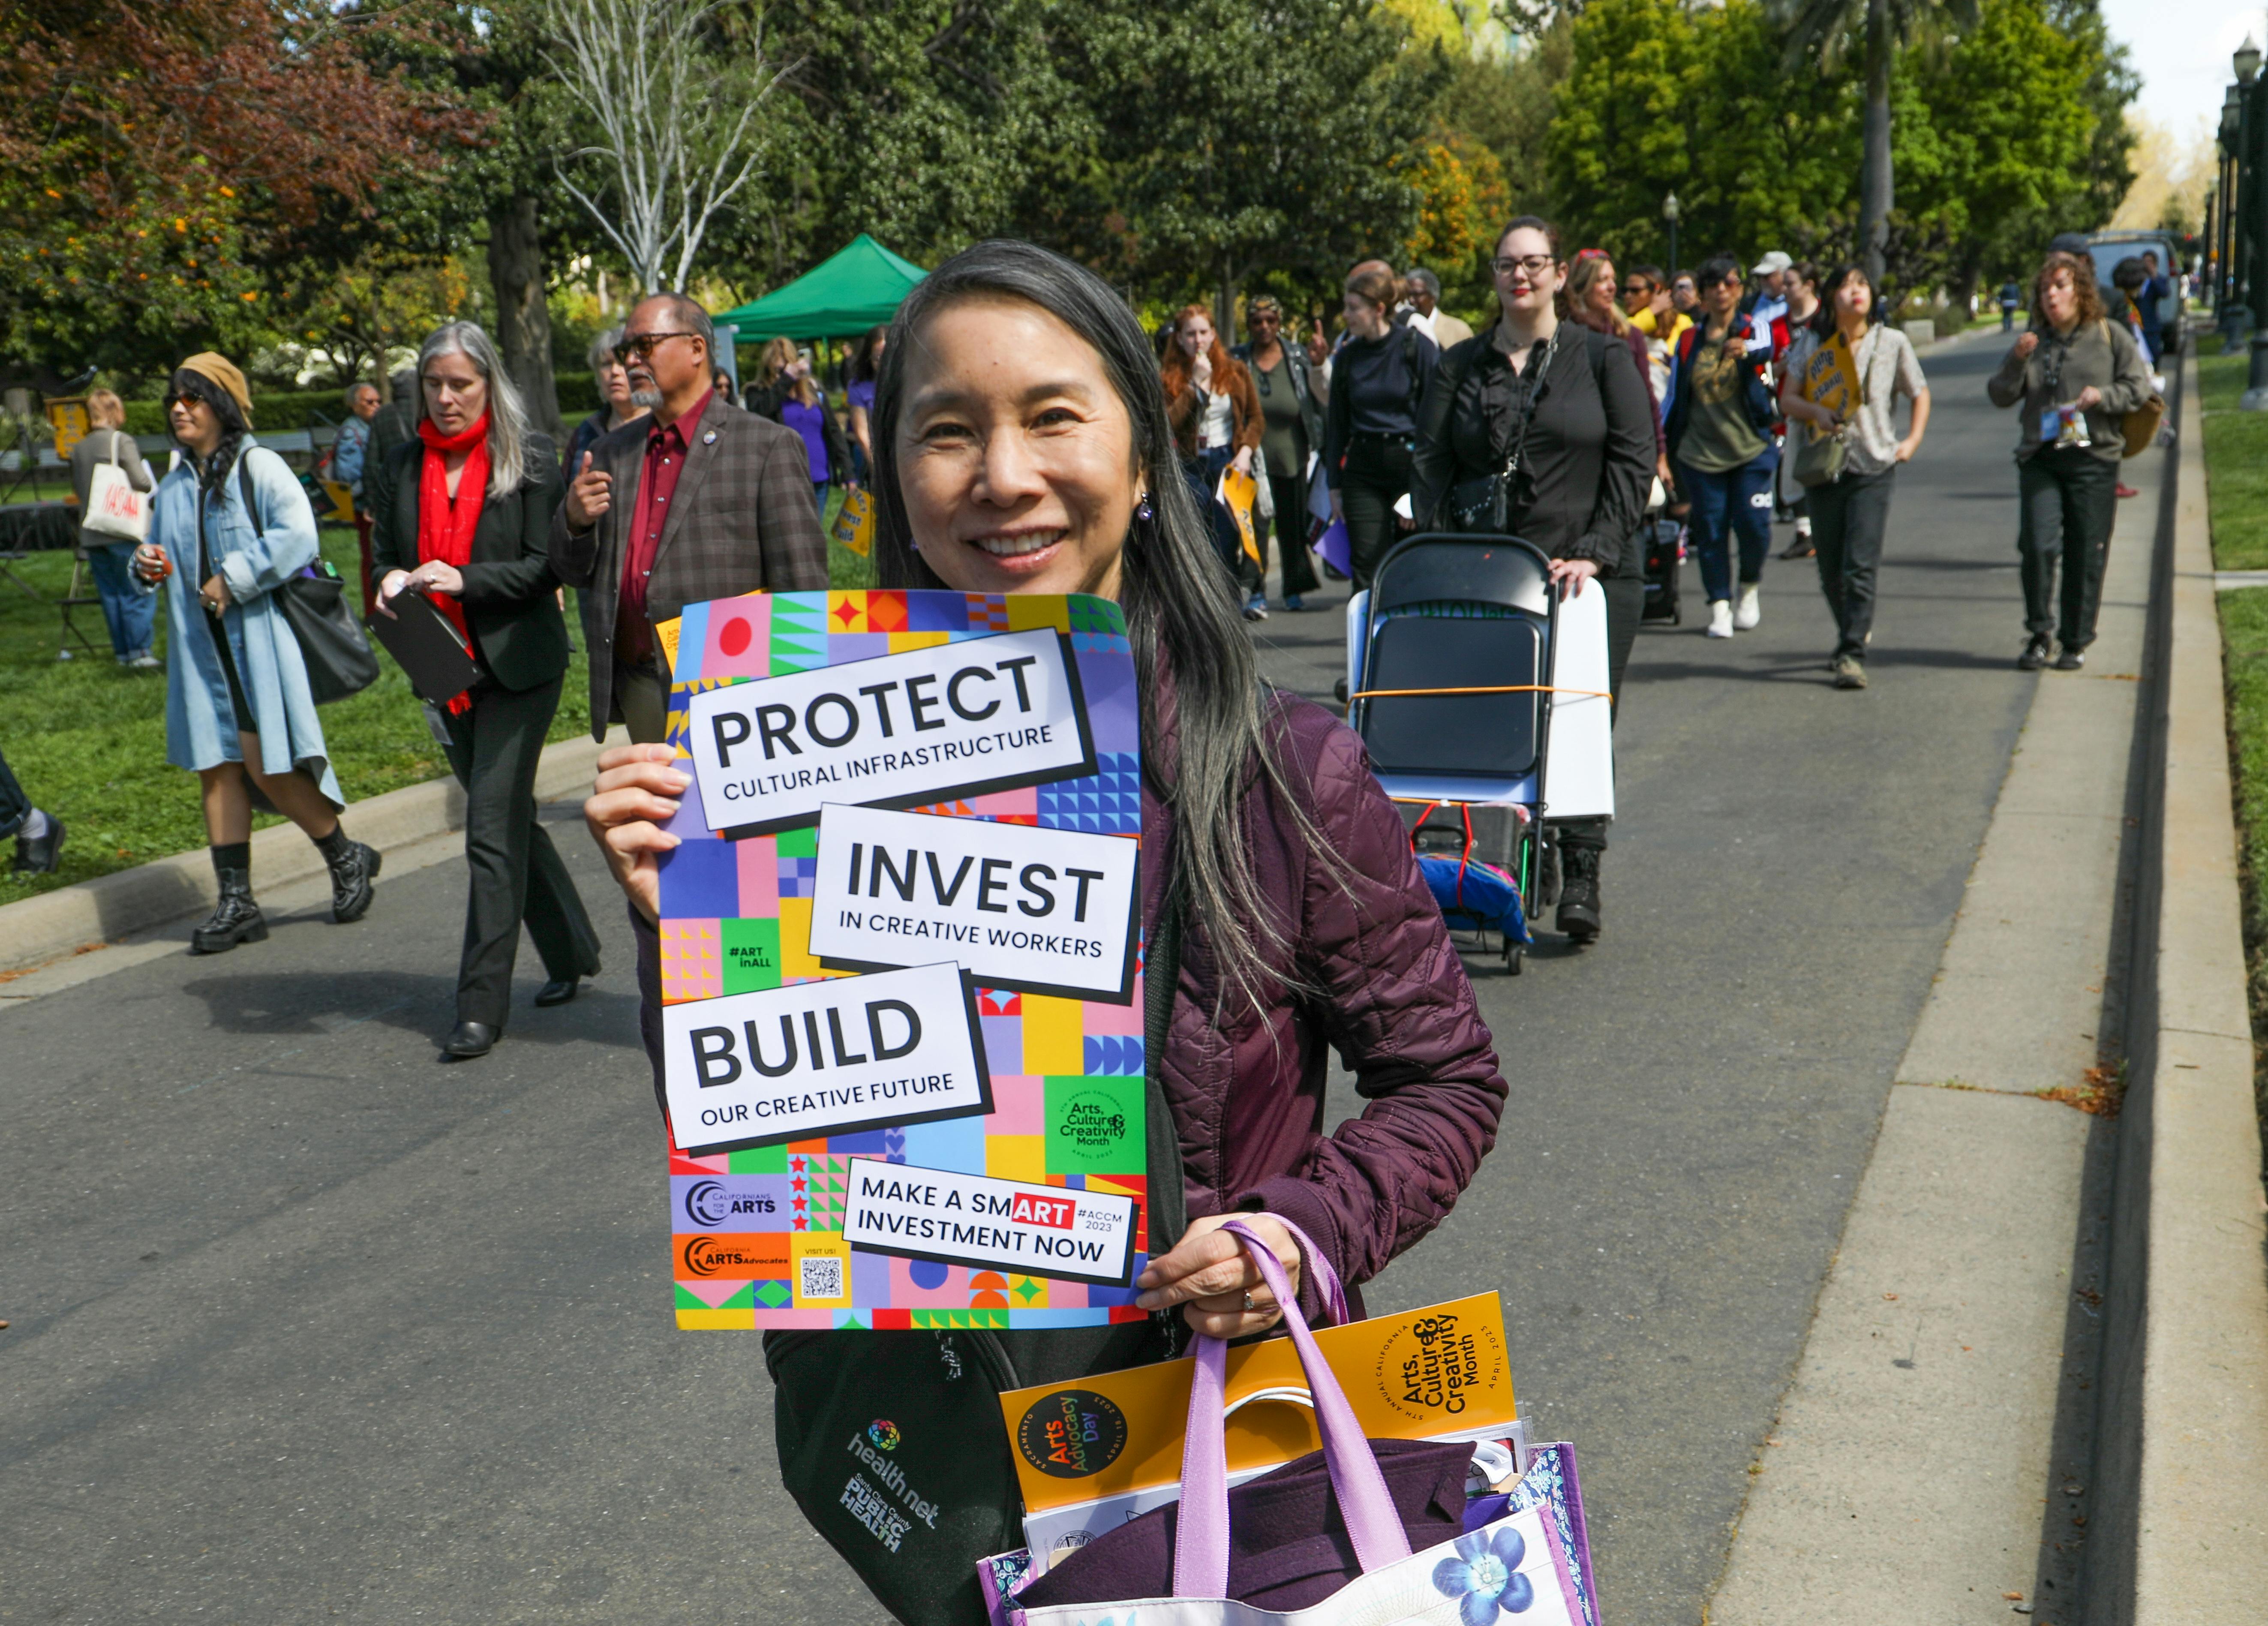 2023 CA Arts Advocacy Day. Photo by Alan Sheckter.